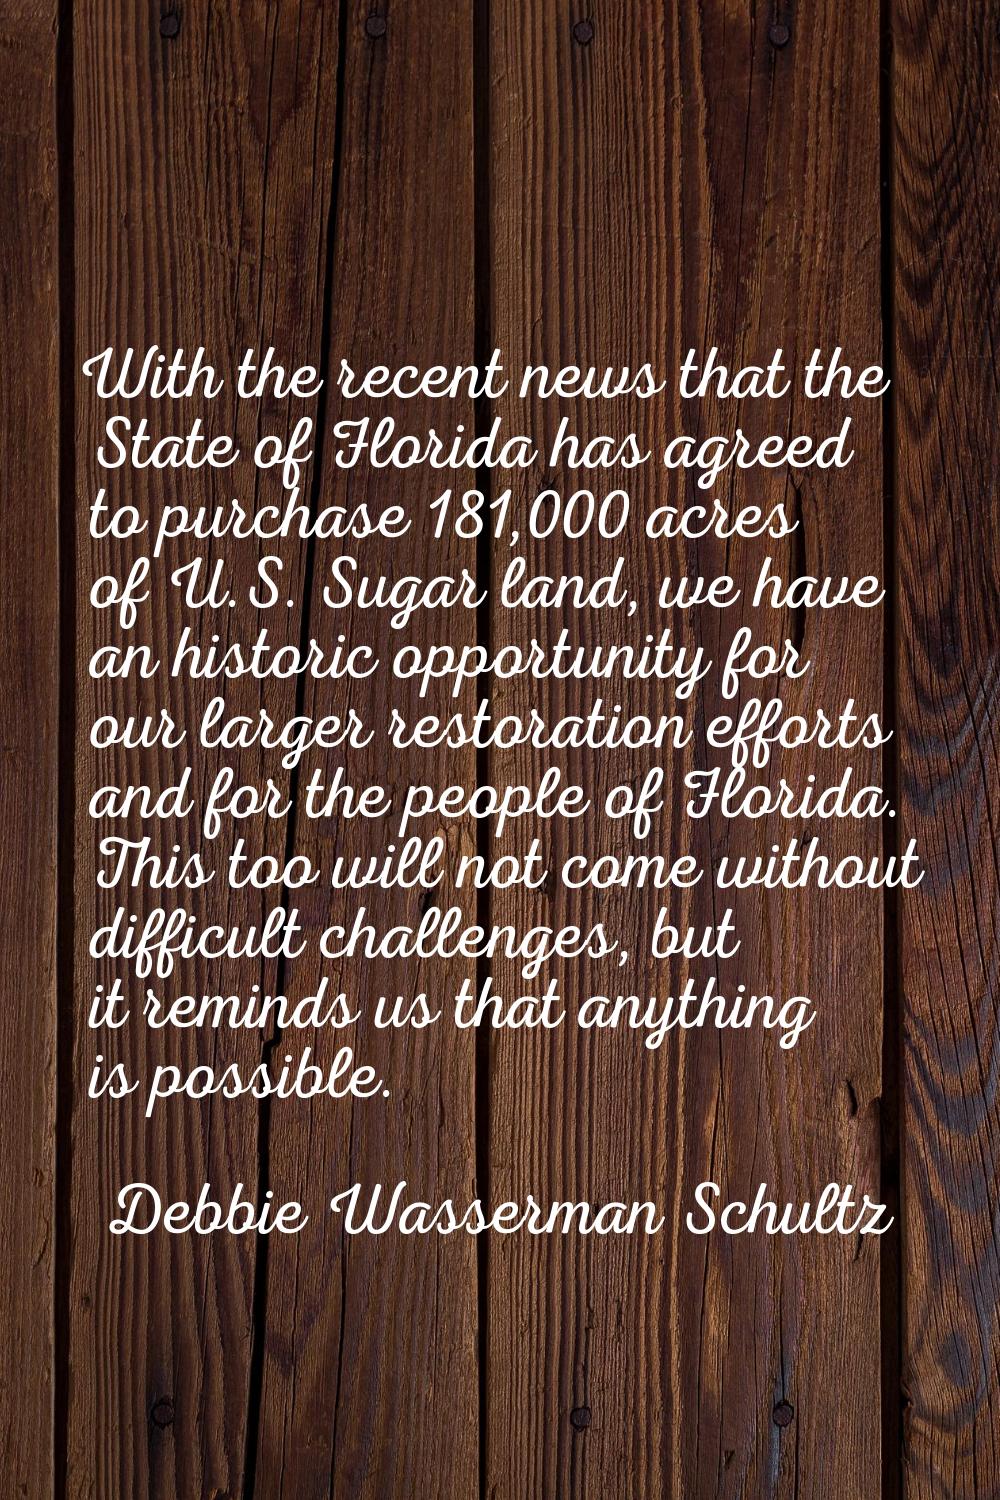 With the recent news that the State of Florida has agreed to purchase 181,000 acres of U.S. Sugar l